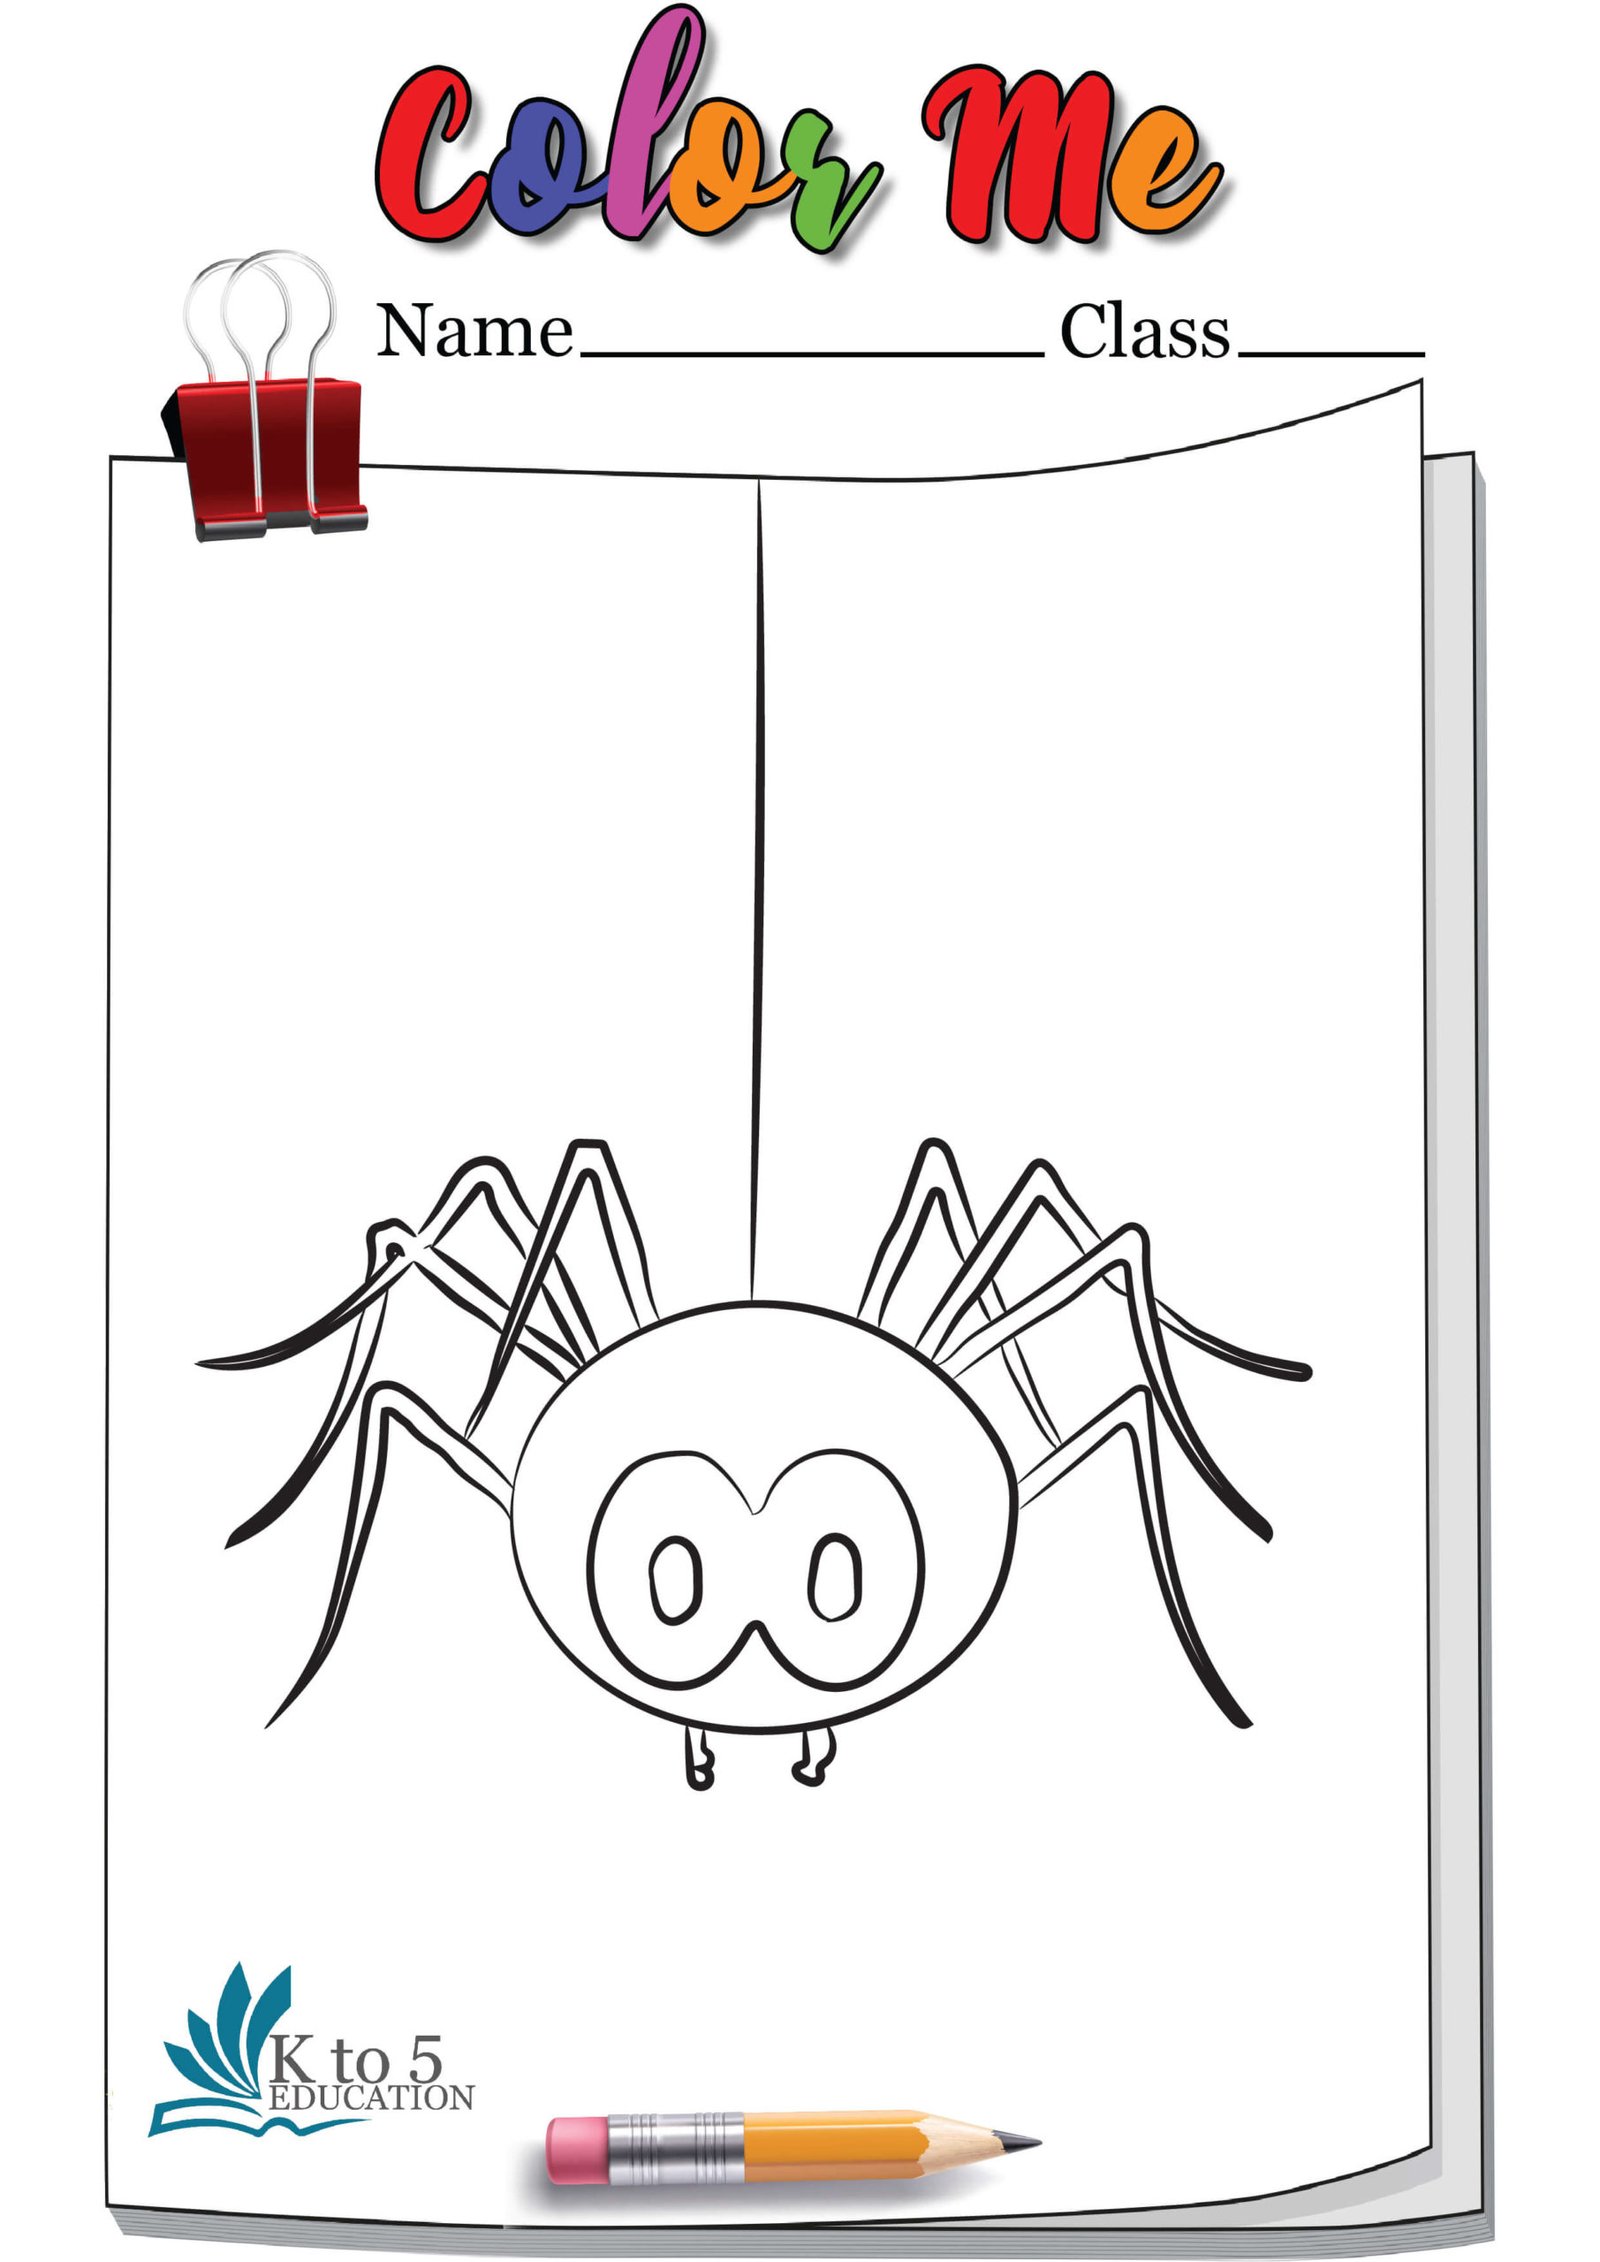 Spider hanging with web coloring page worksheet